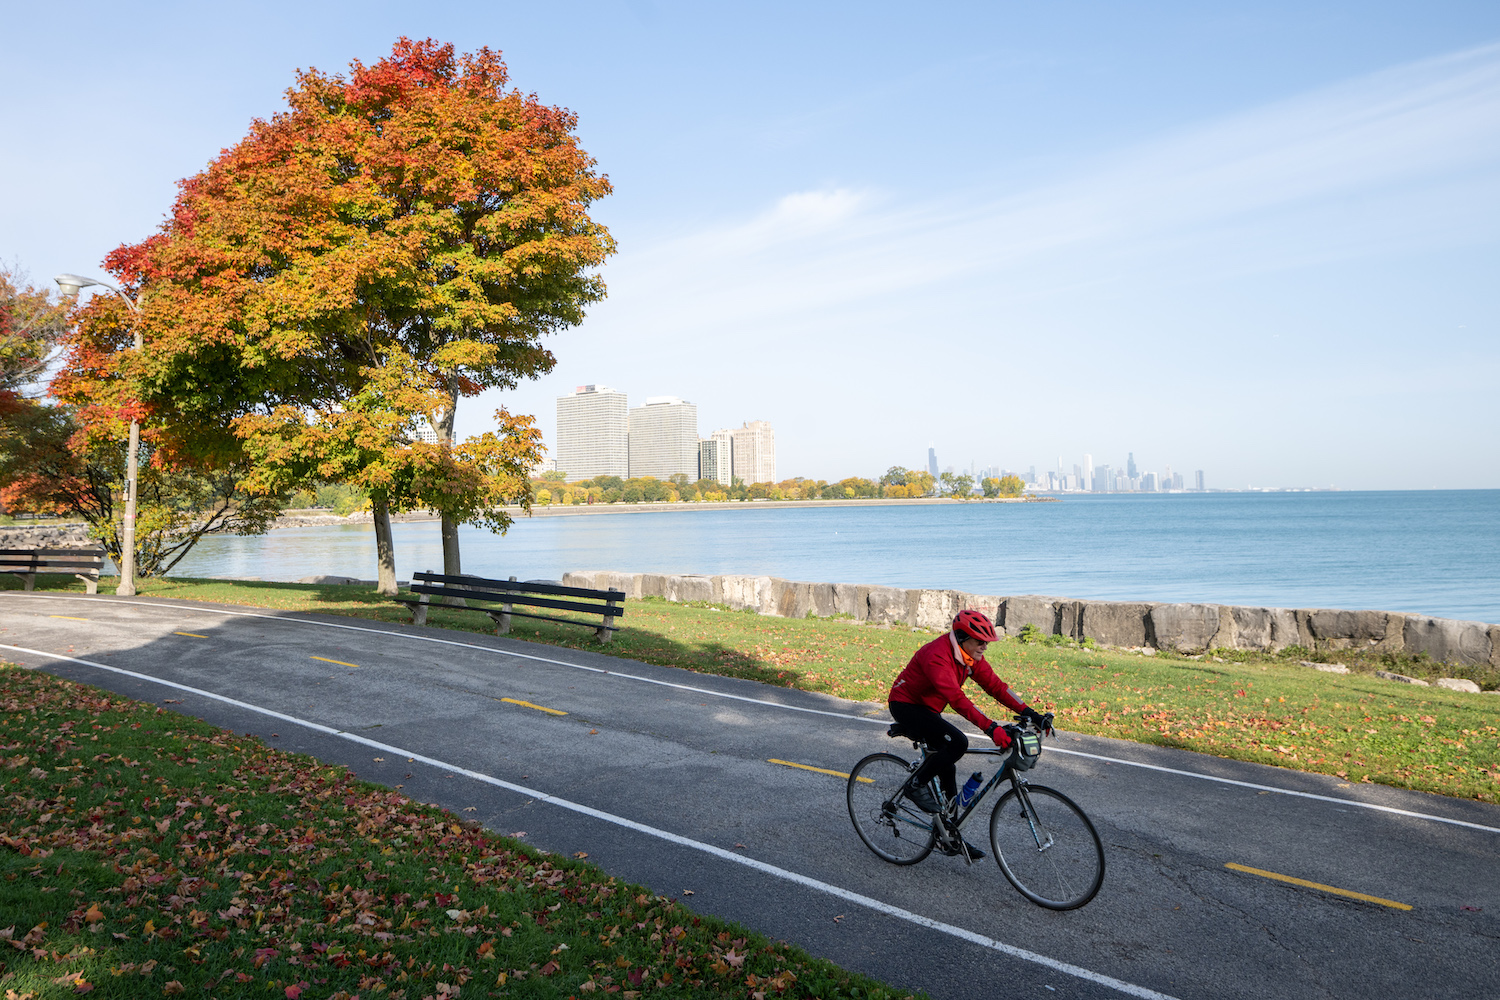 Chicago's iconic Lakefront Trail offers 18 miles of breathtaking lake and skyline views